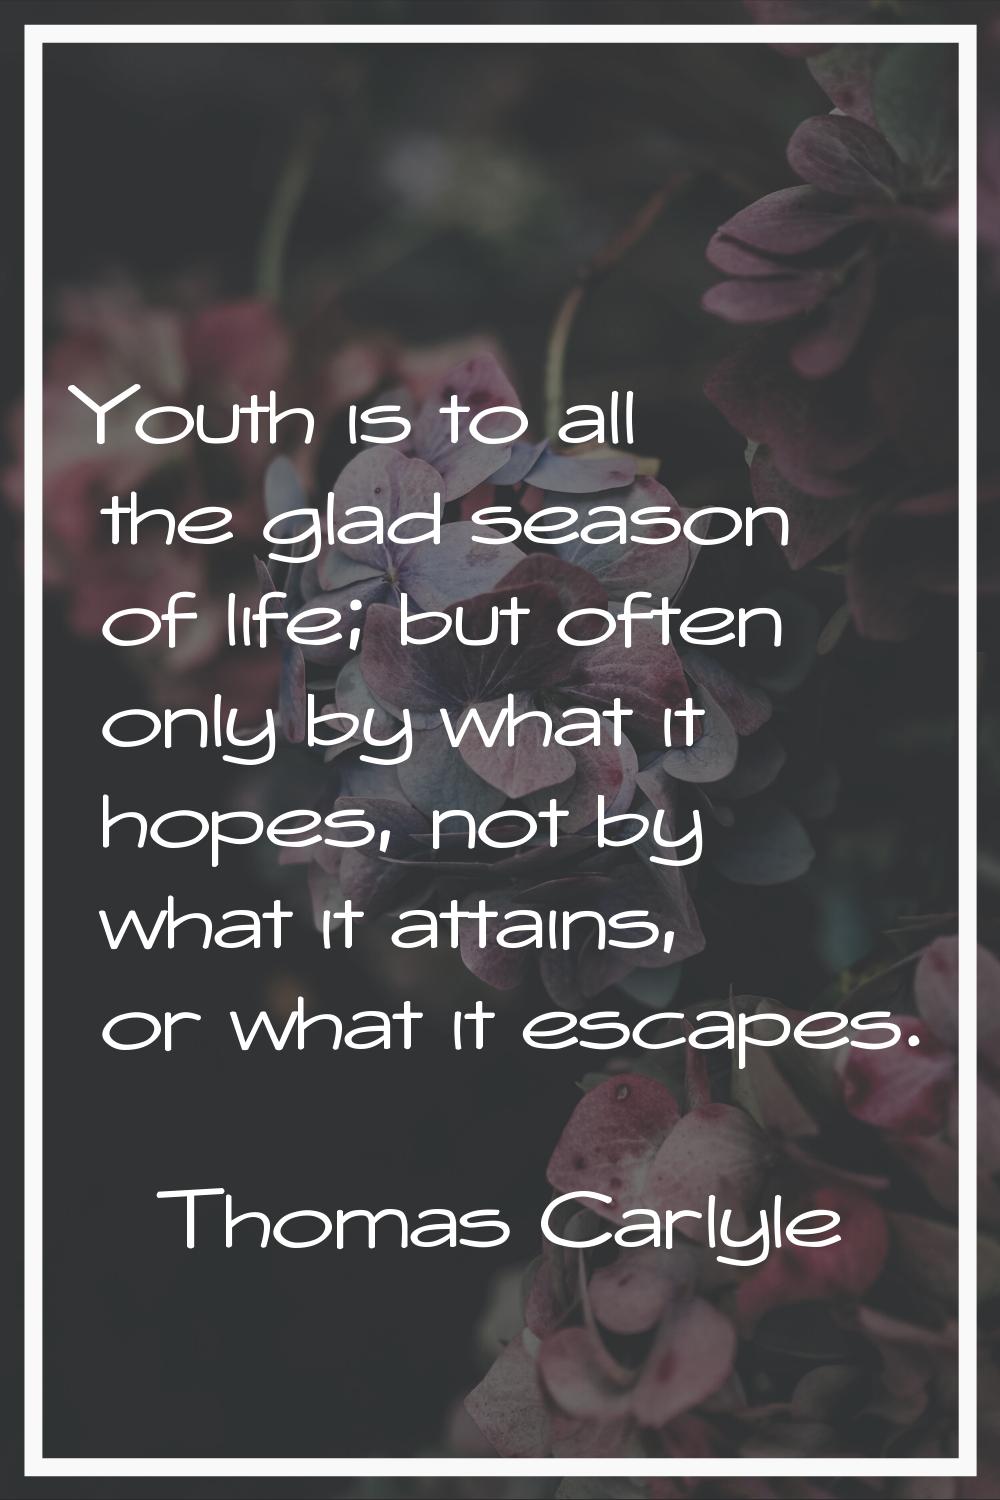 Youth is to all the glad season of life; but often only by what it hopes, not by what it attains, o